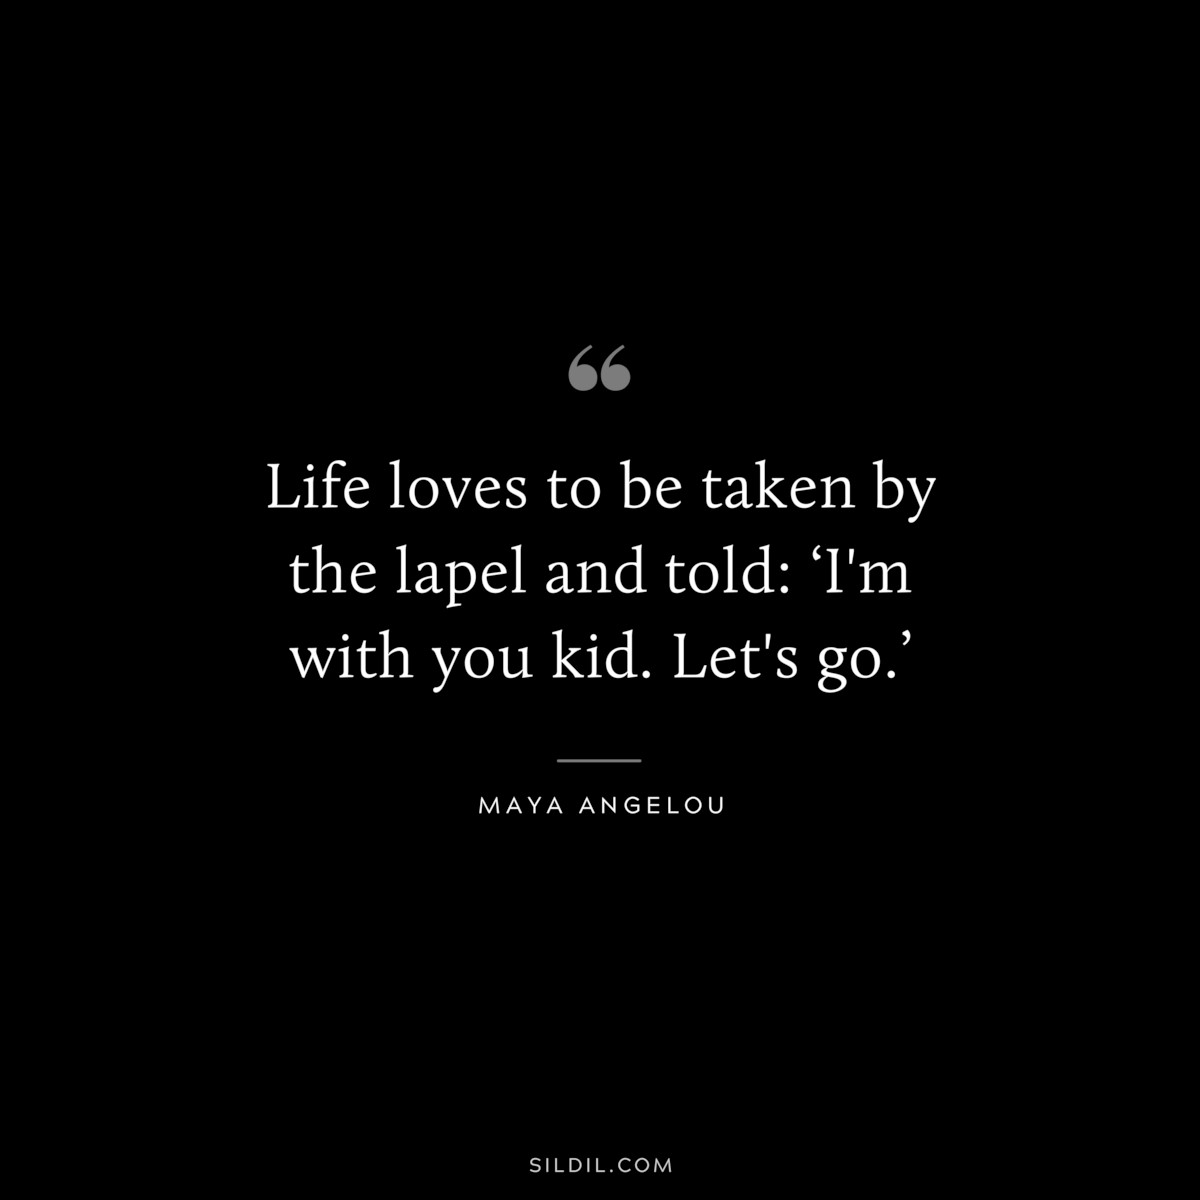 Life loves to be taken by the lapel and told: ‘I'm with you kid. Let's go.’ ― Maya Angelou